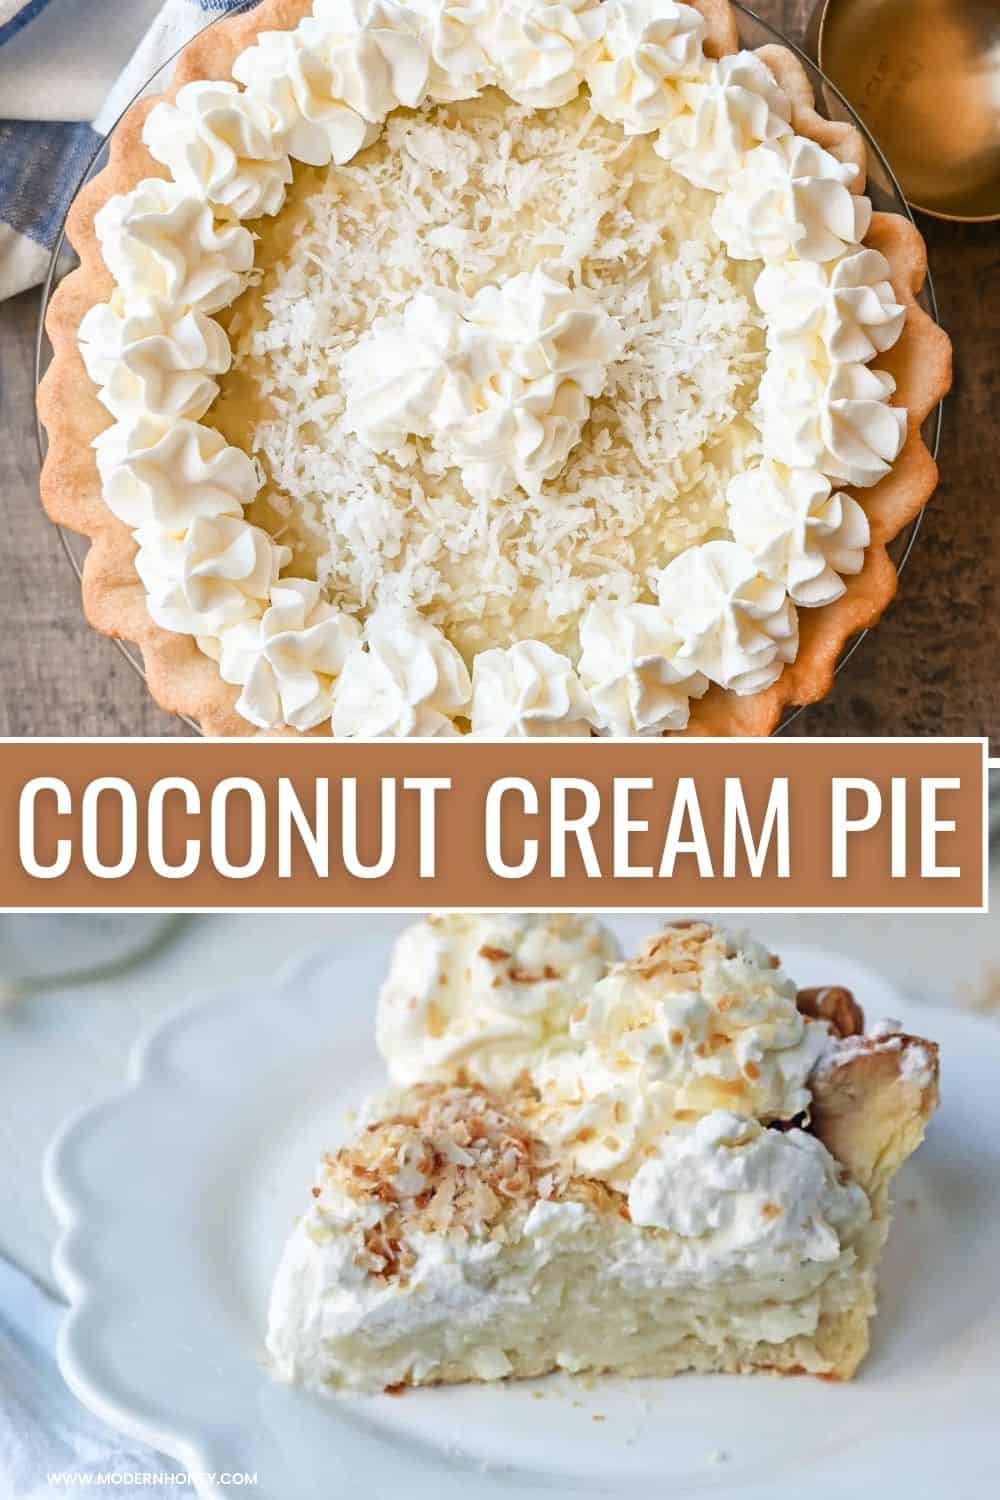 This Coconut Cream Pie is made with a homemade coconut custard filling in a buttery pie crust topped with fresh whipped cream and toasted coconut. This is the famous Dahlia Bakery's secret coconut cream pie recipe.